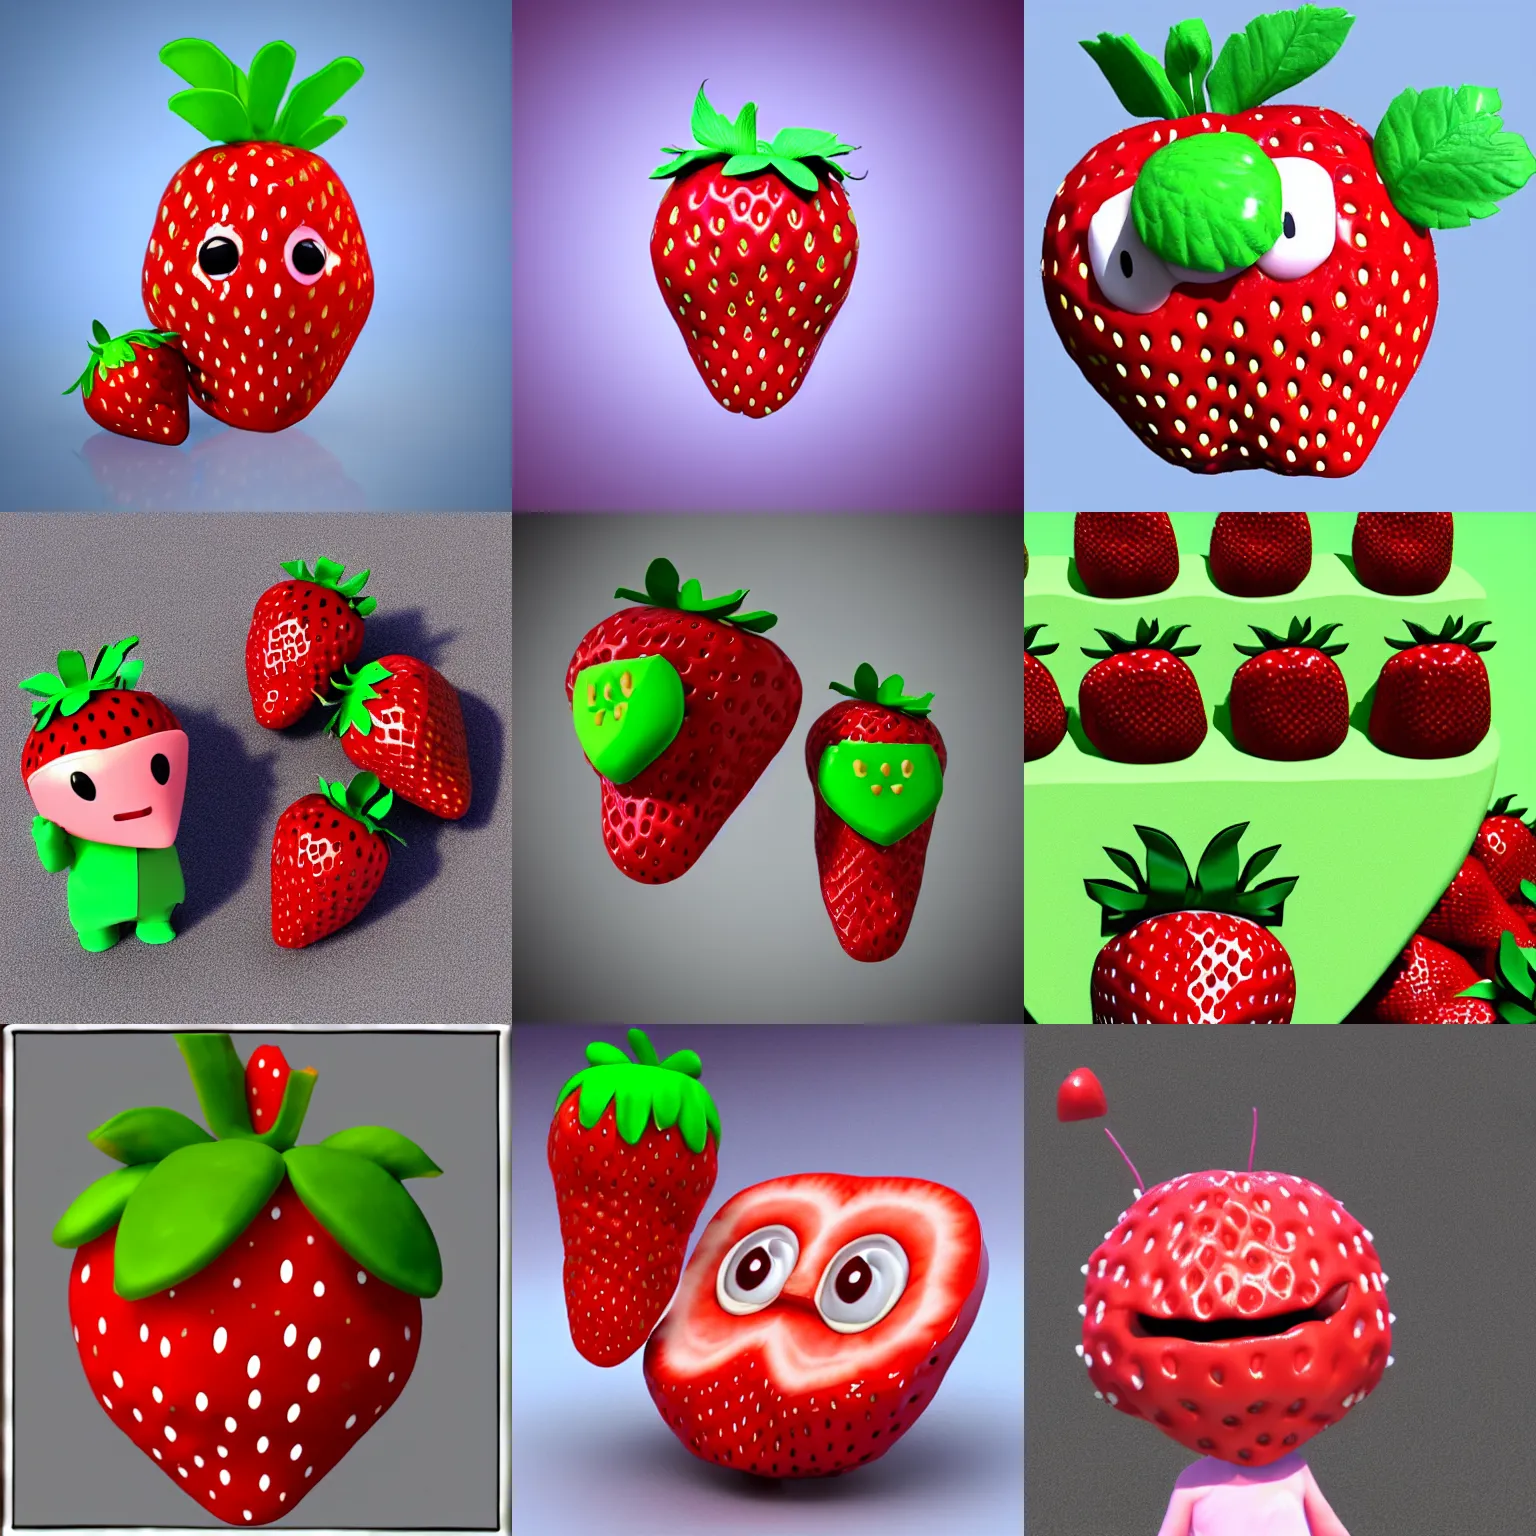 Little Red Blasting Fruit by jchenmotiondesign